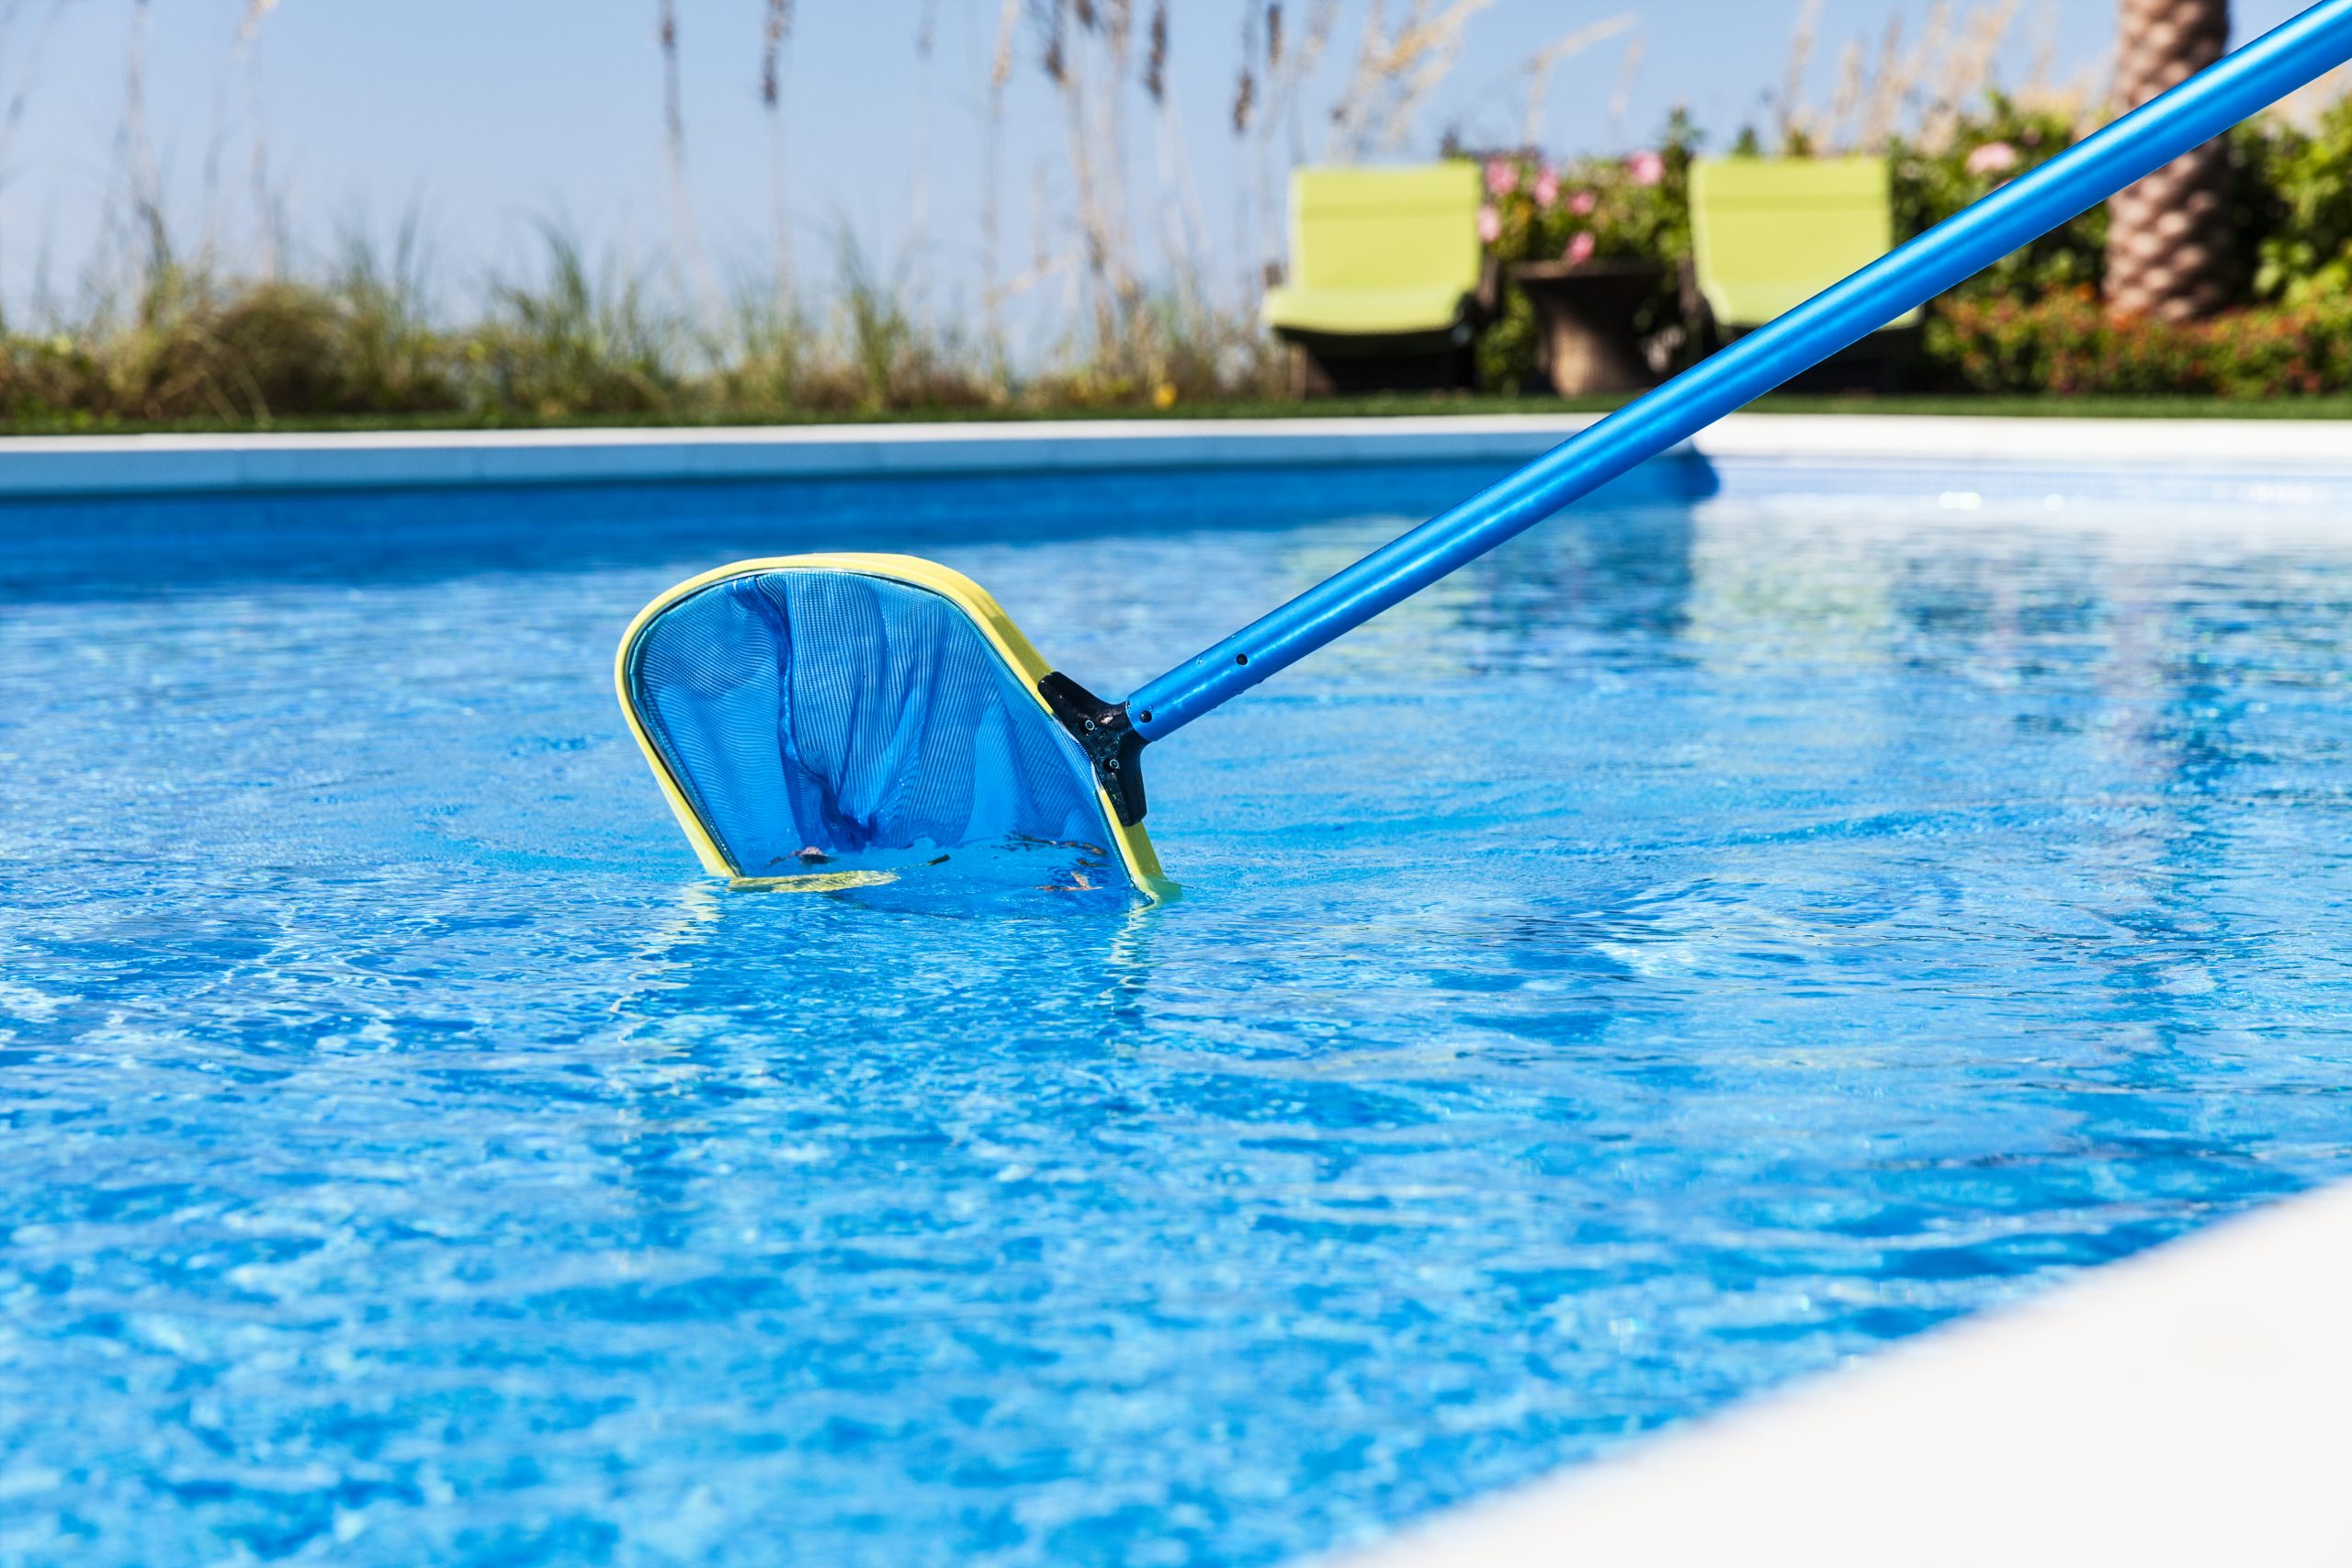 Pool Cleaning Mistakes